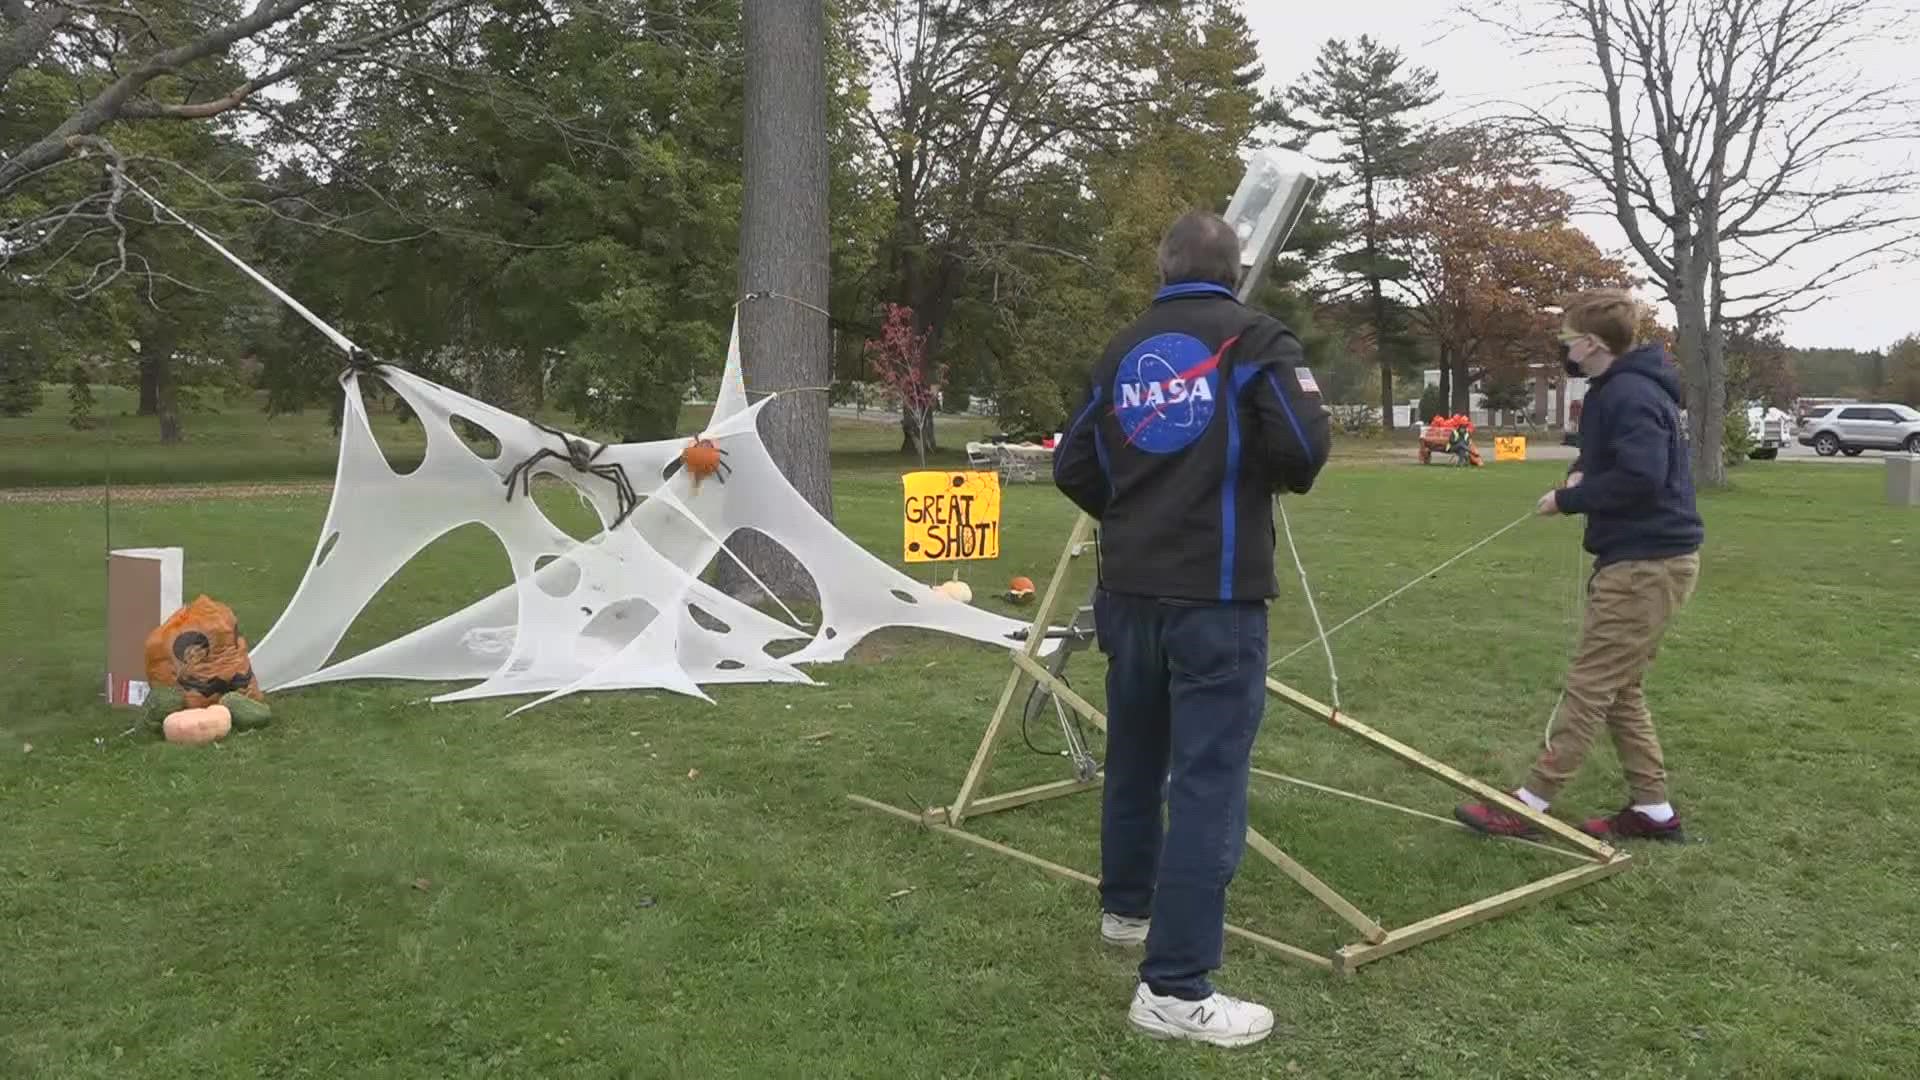 Saturday's event gave kids a chance to learn about science while getting into the Halloween spirit.